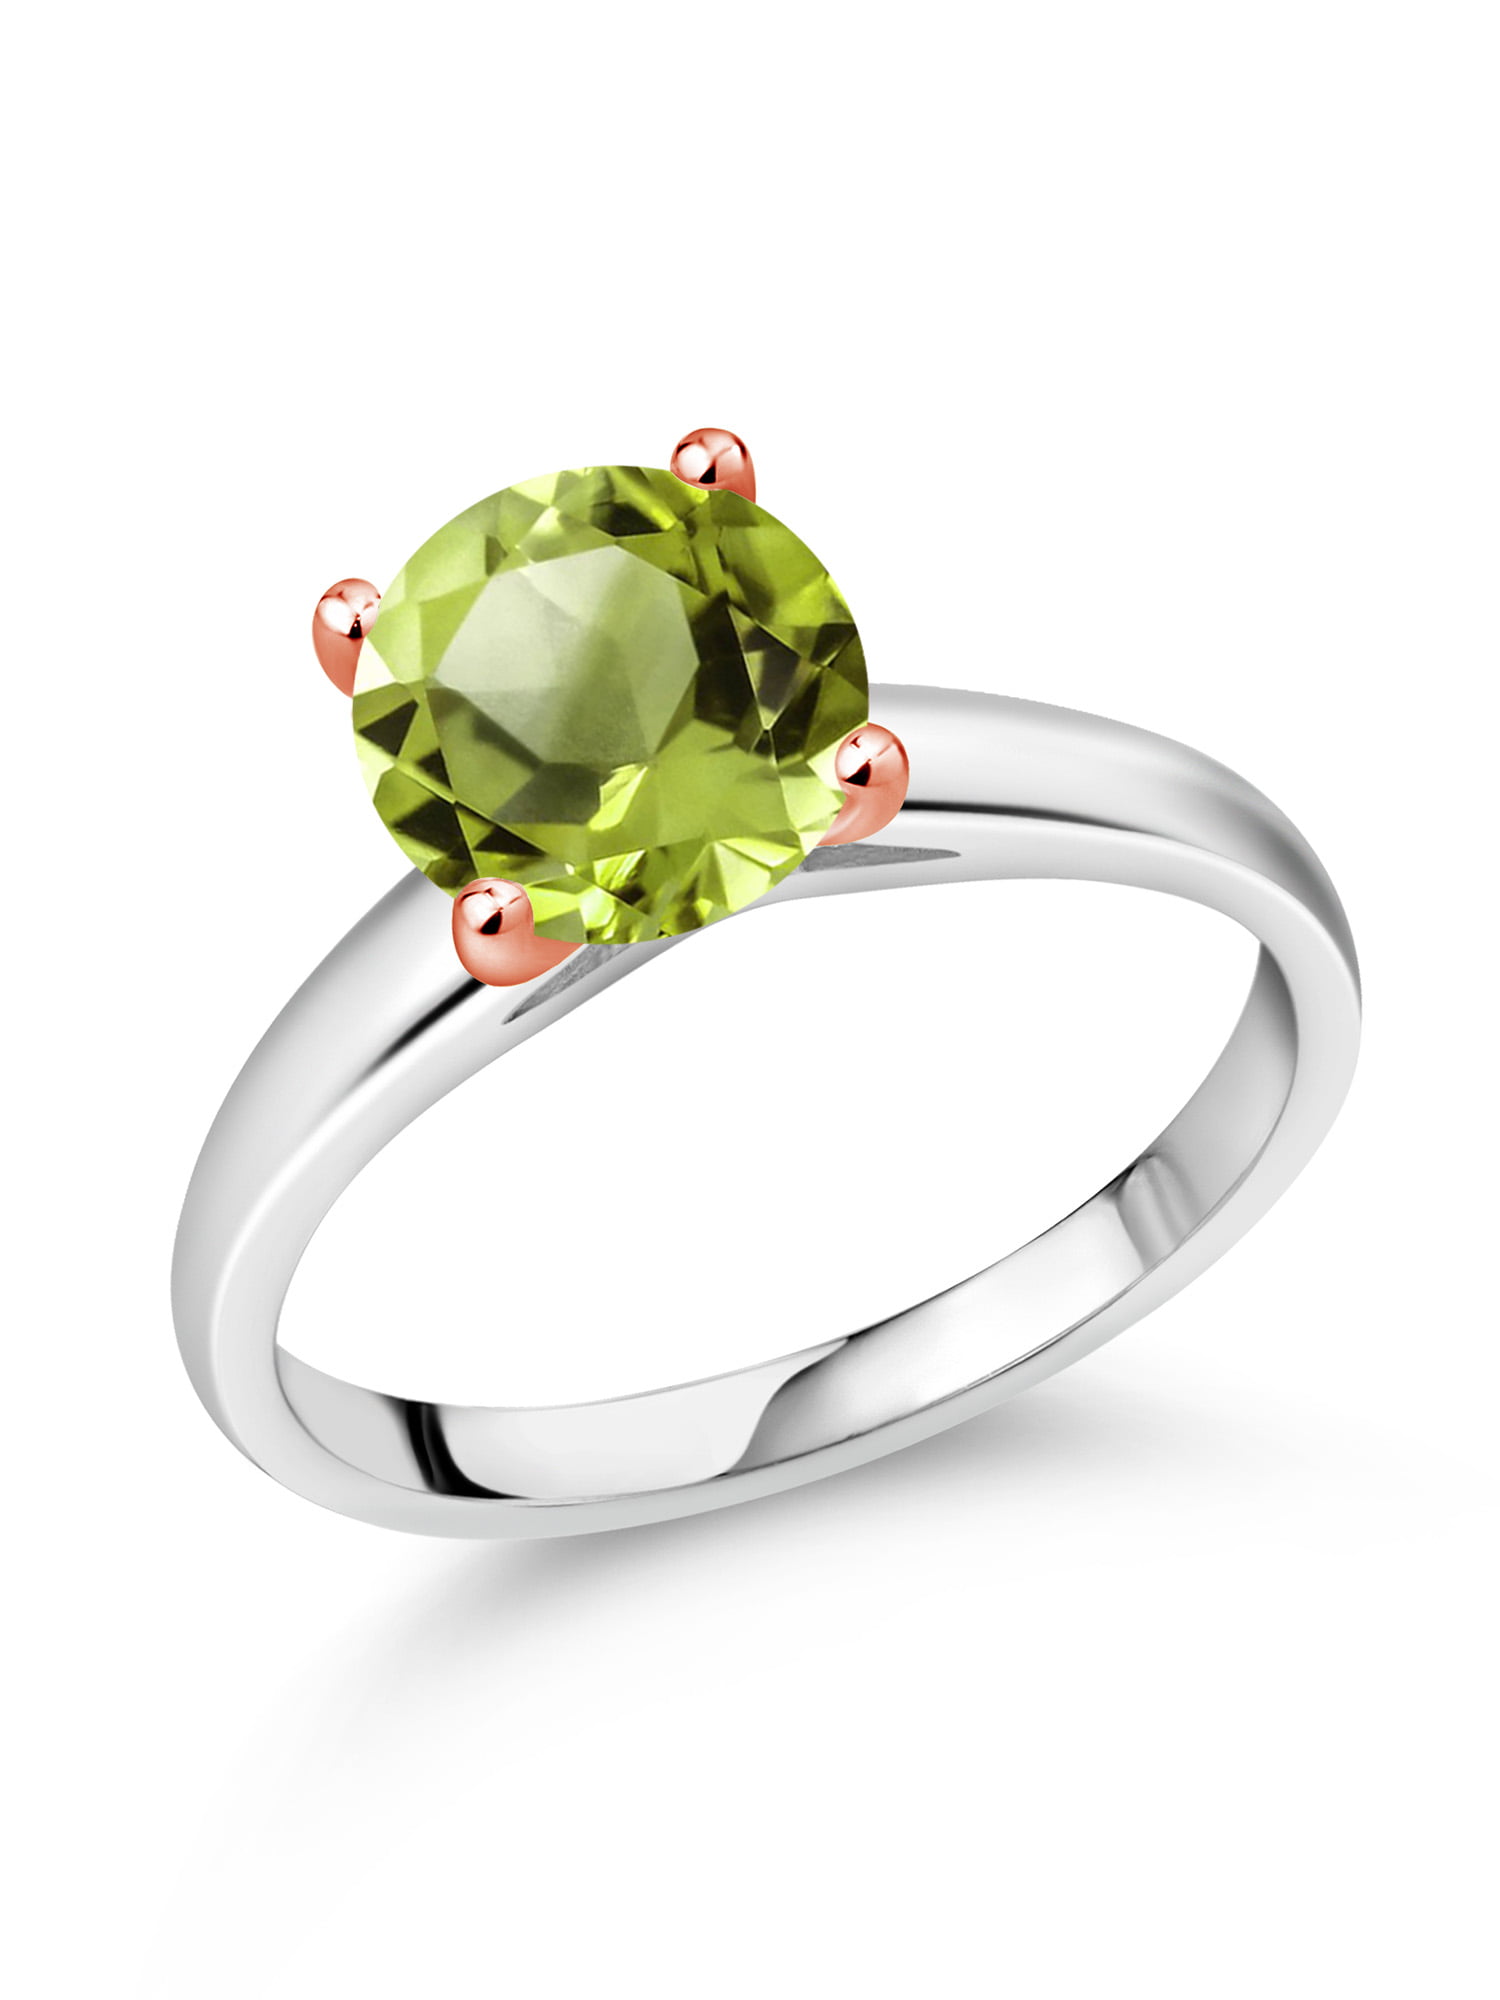 2.07 Ct Oval Green Peridot 925 Sterling Silver Ring 